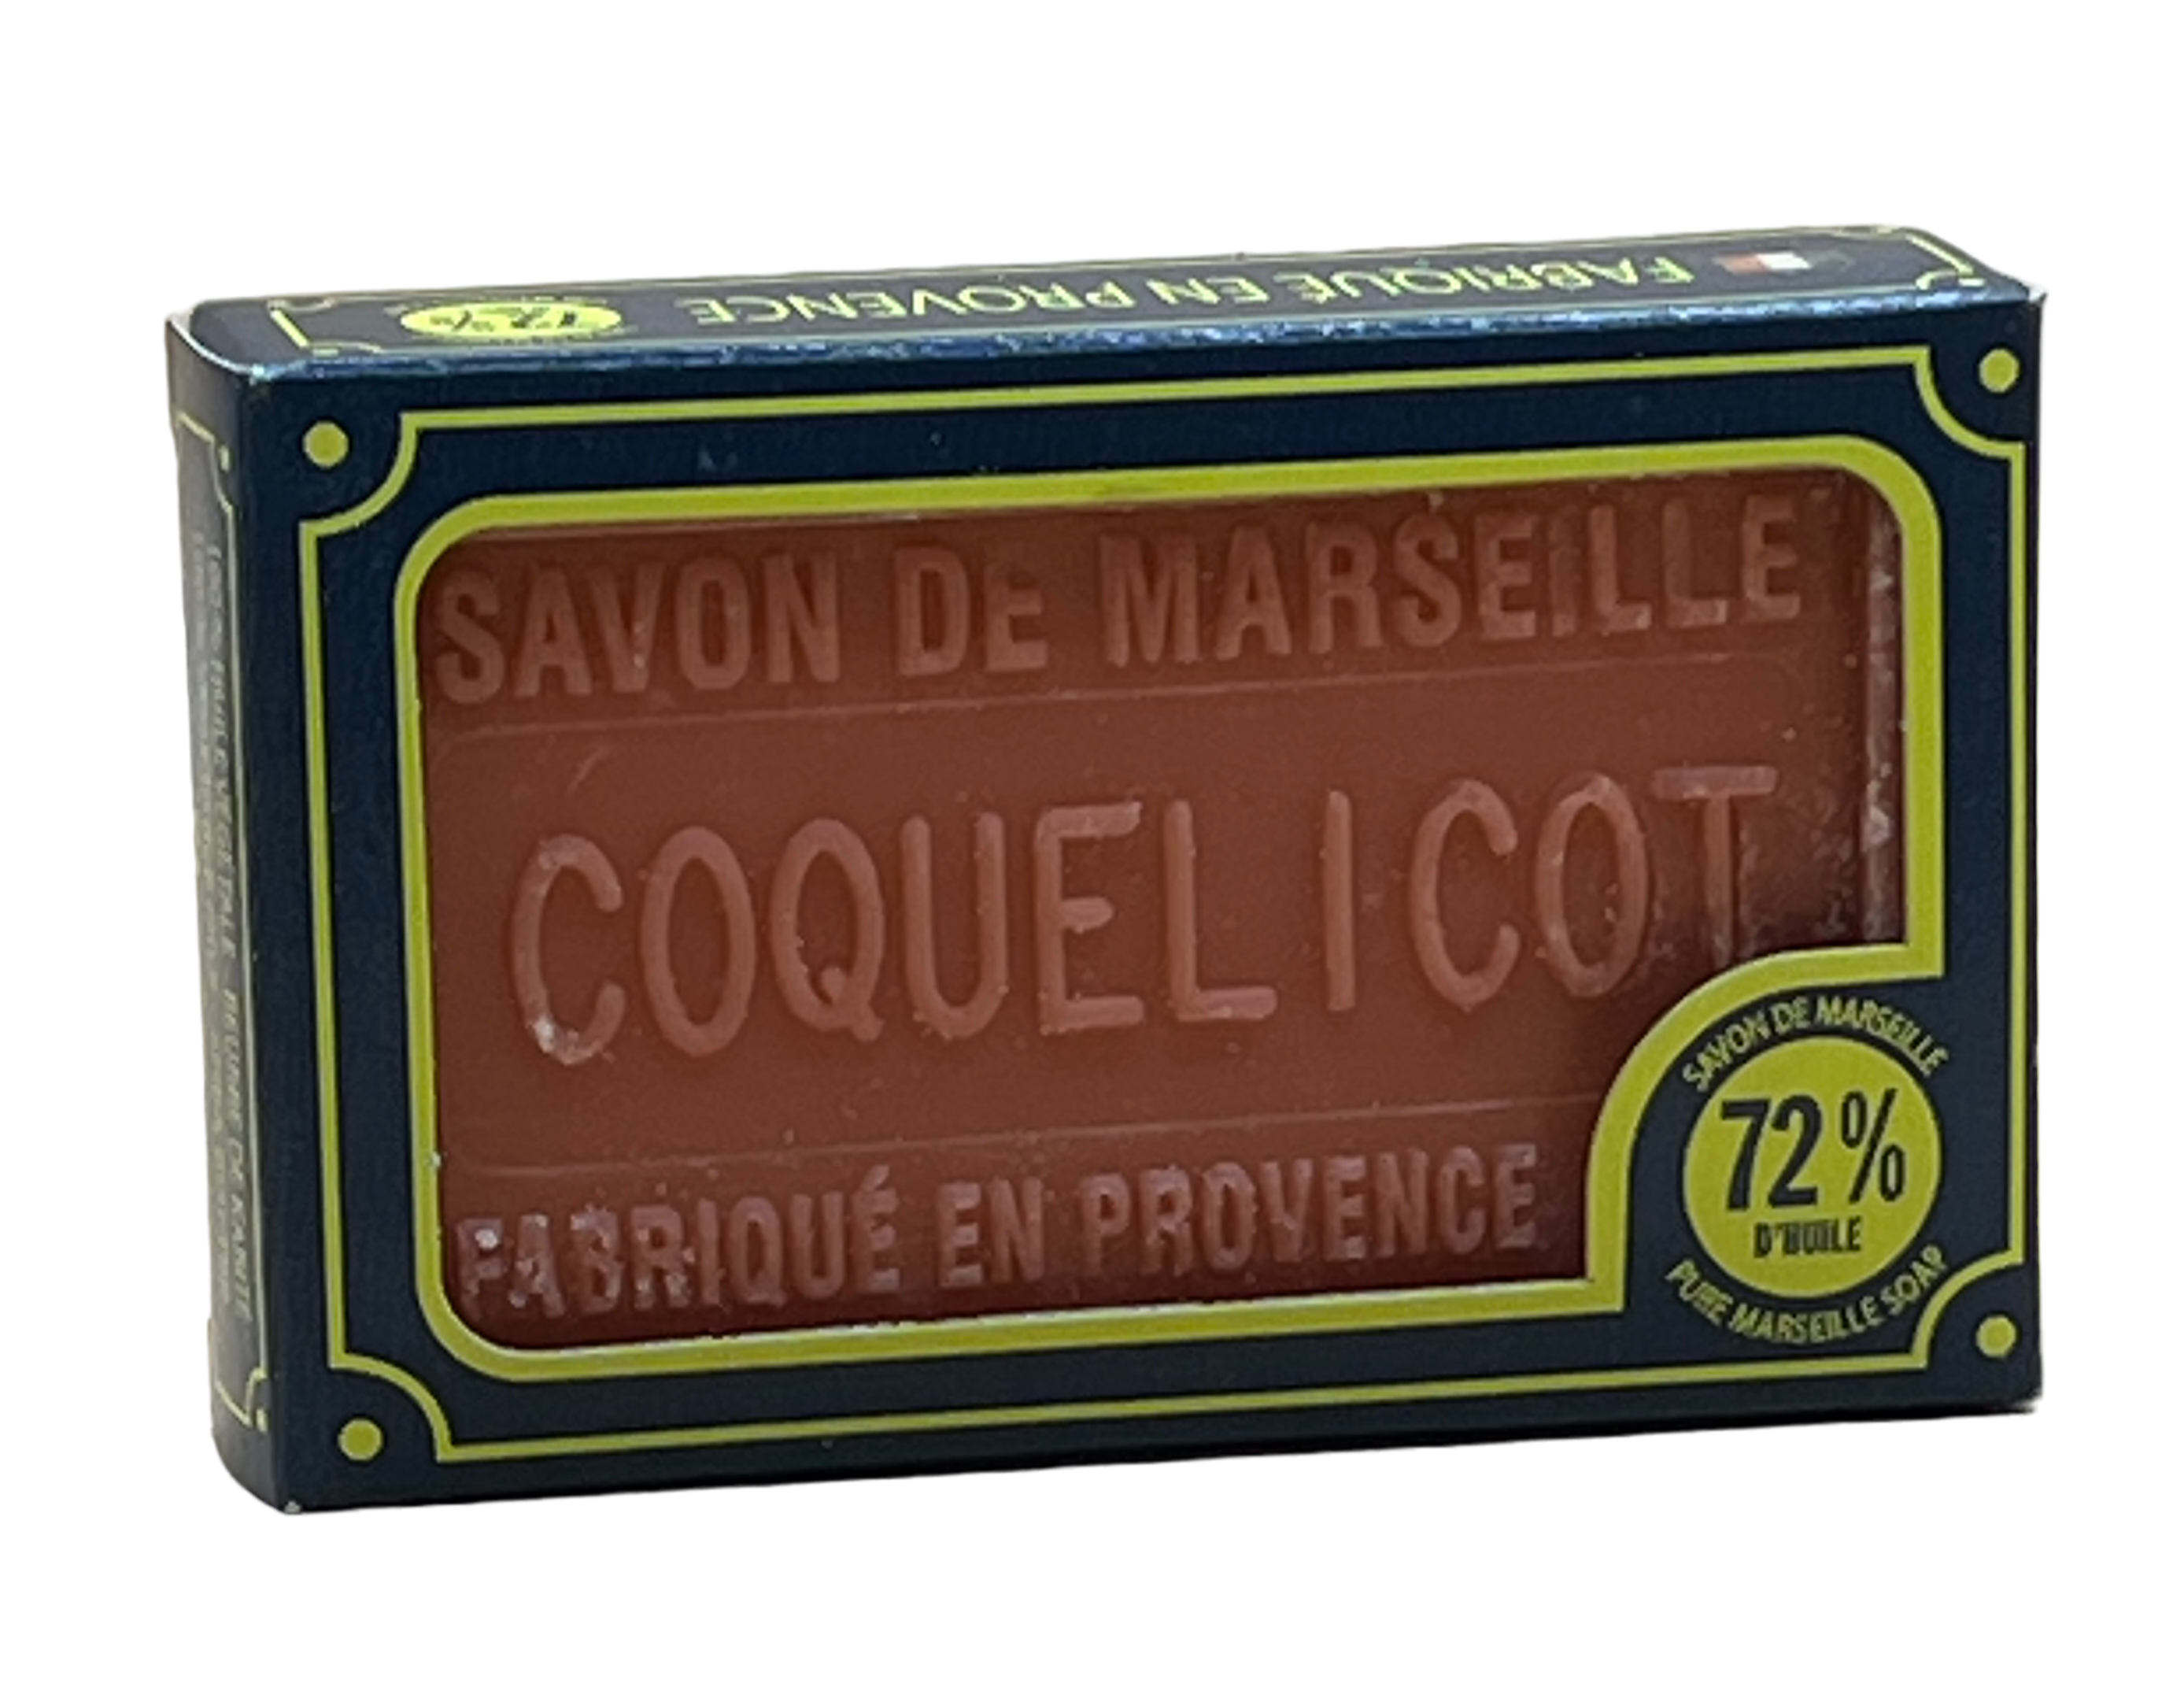 Coquelicot (Poppy), Marseille Soap with Shea Butter | 100g